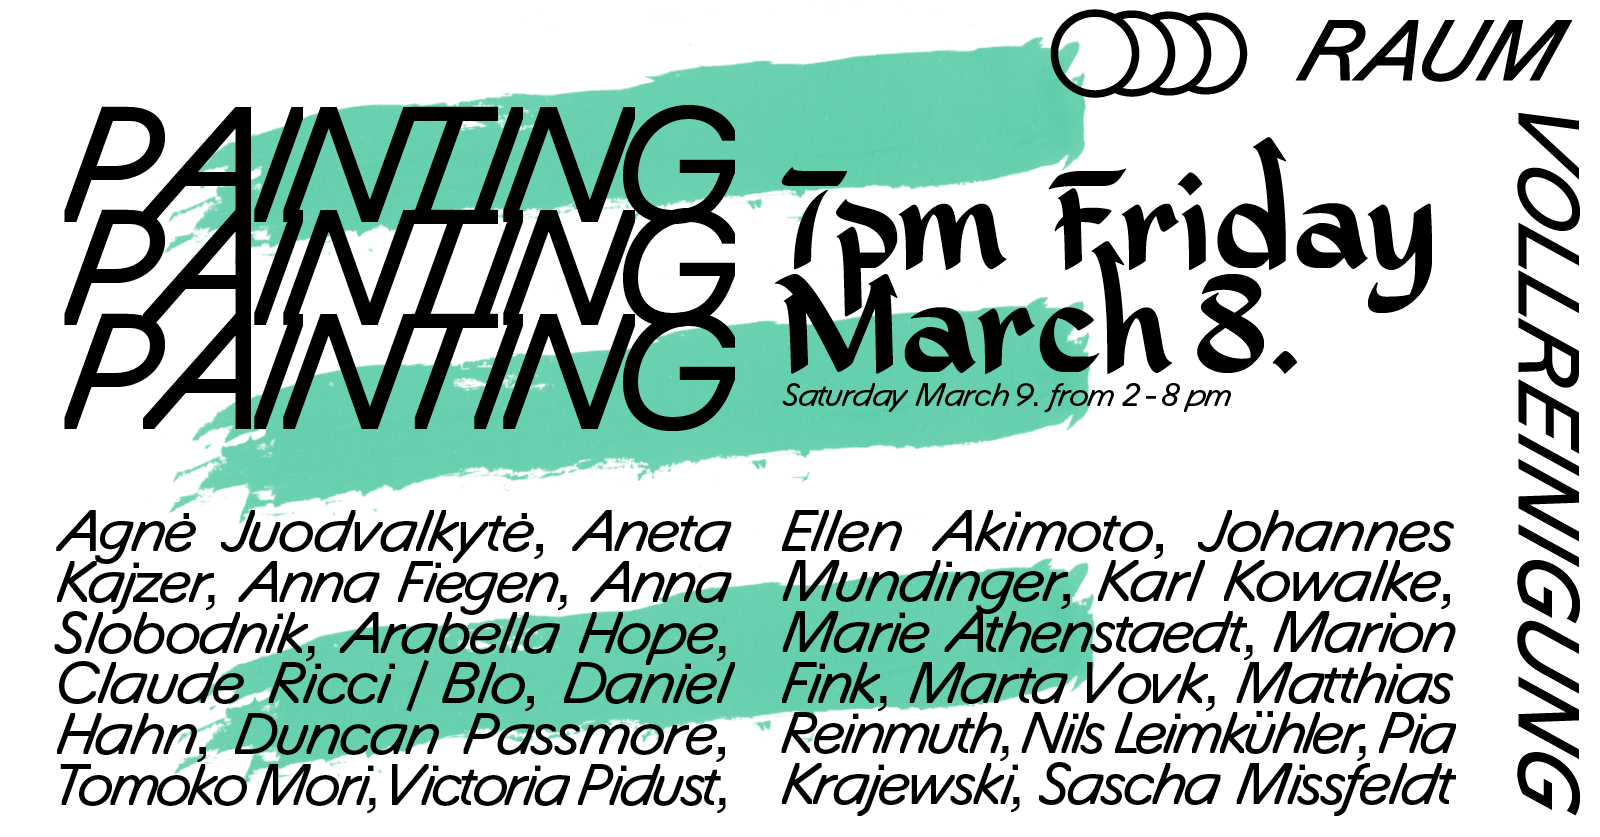 Painting Painting Painting exhibtion flier